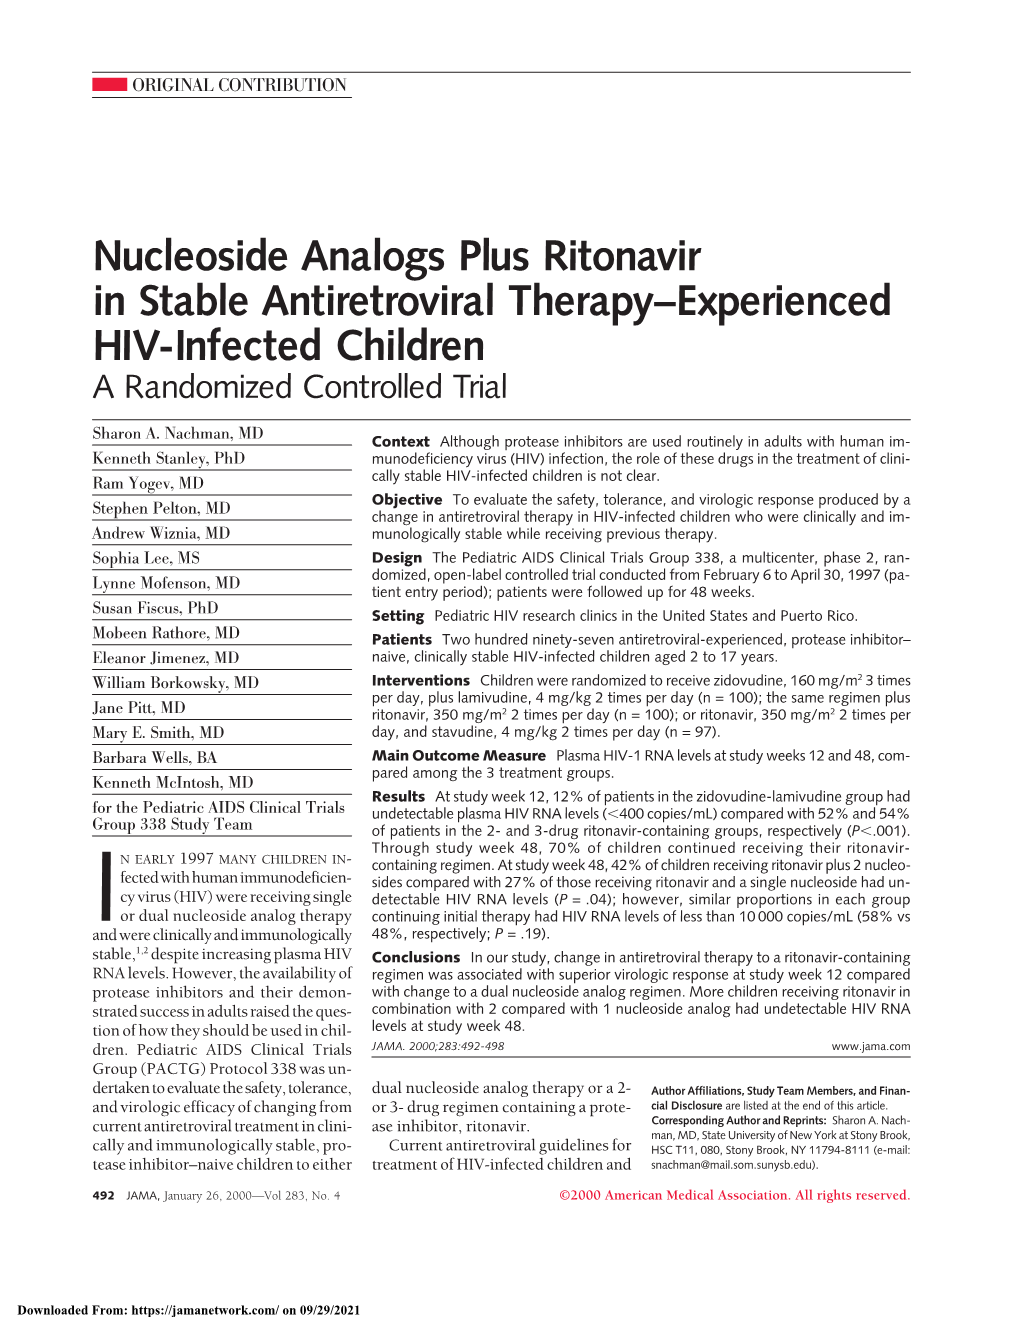 Nucleoside Analogs Plus Ritonavir in Stable Antiretroviral Therapy–Experienced HIV-Infected Children a Randomized Controlled Trial